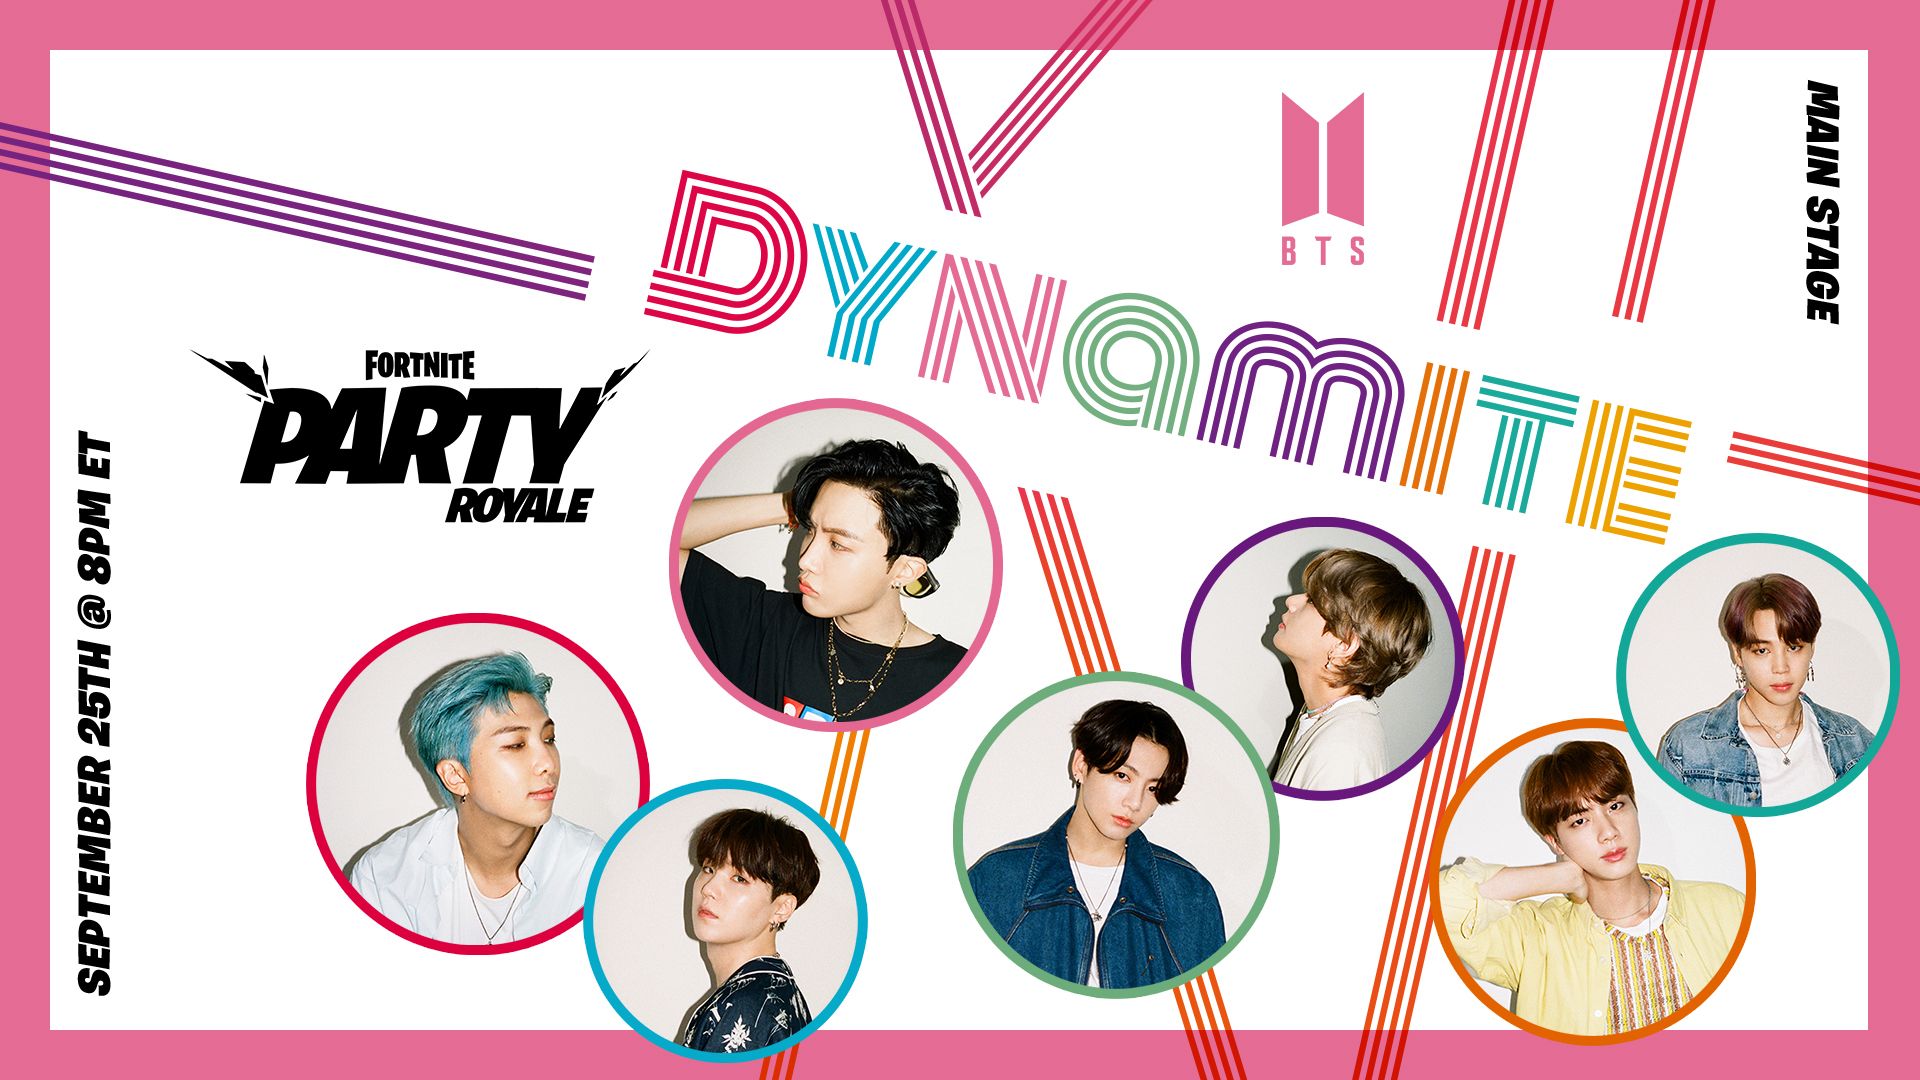 Fortnite's Party Royale to Host the World Premiere For BTS' “Dynamite” Choreography Version Music Video!